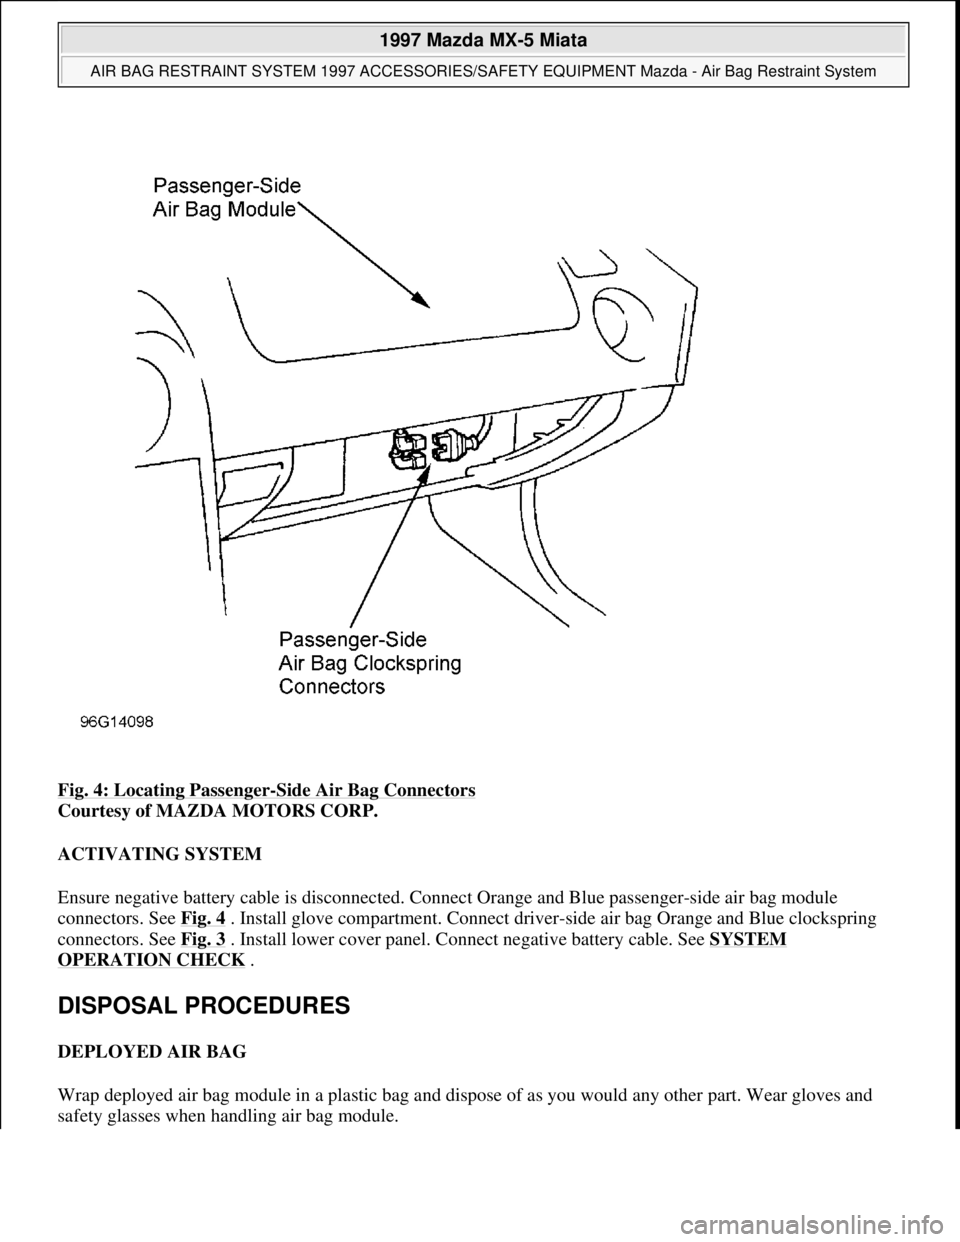 MAZDA MIATA 1997  Factory Repair Manual Fig. 4: Locating Passenger-Side Air Bag Connectors 
Courtesy of MAZDA MOTORS CORP. 
ACTIVATING SYSTEM 
Ensure negative battery cable is disconnected. Connect Orange and Blue passenger-side air bag mod